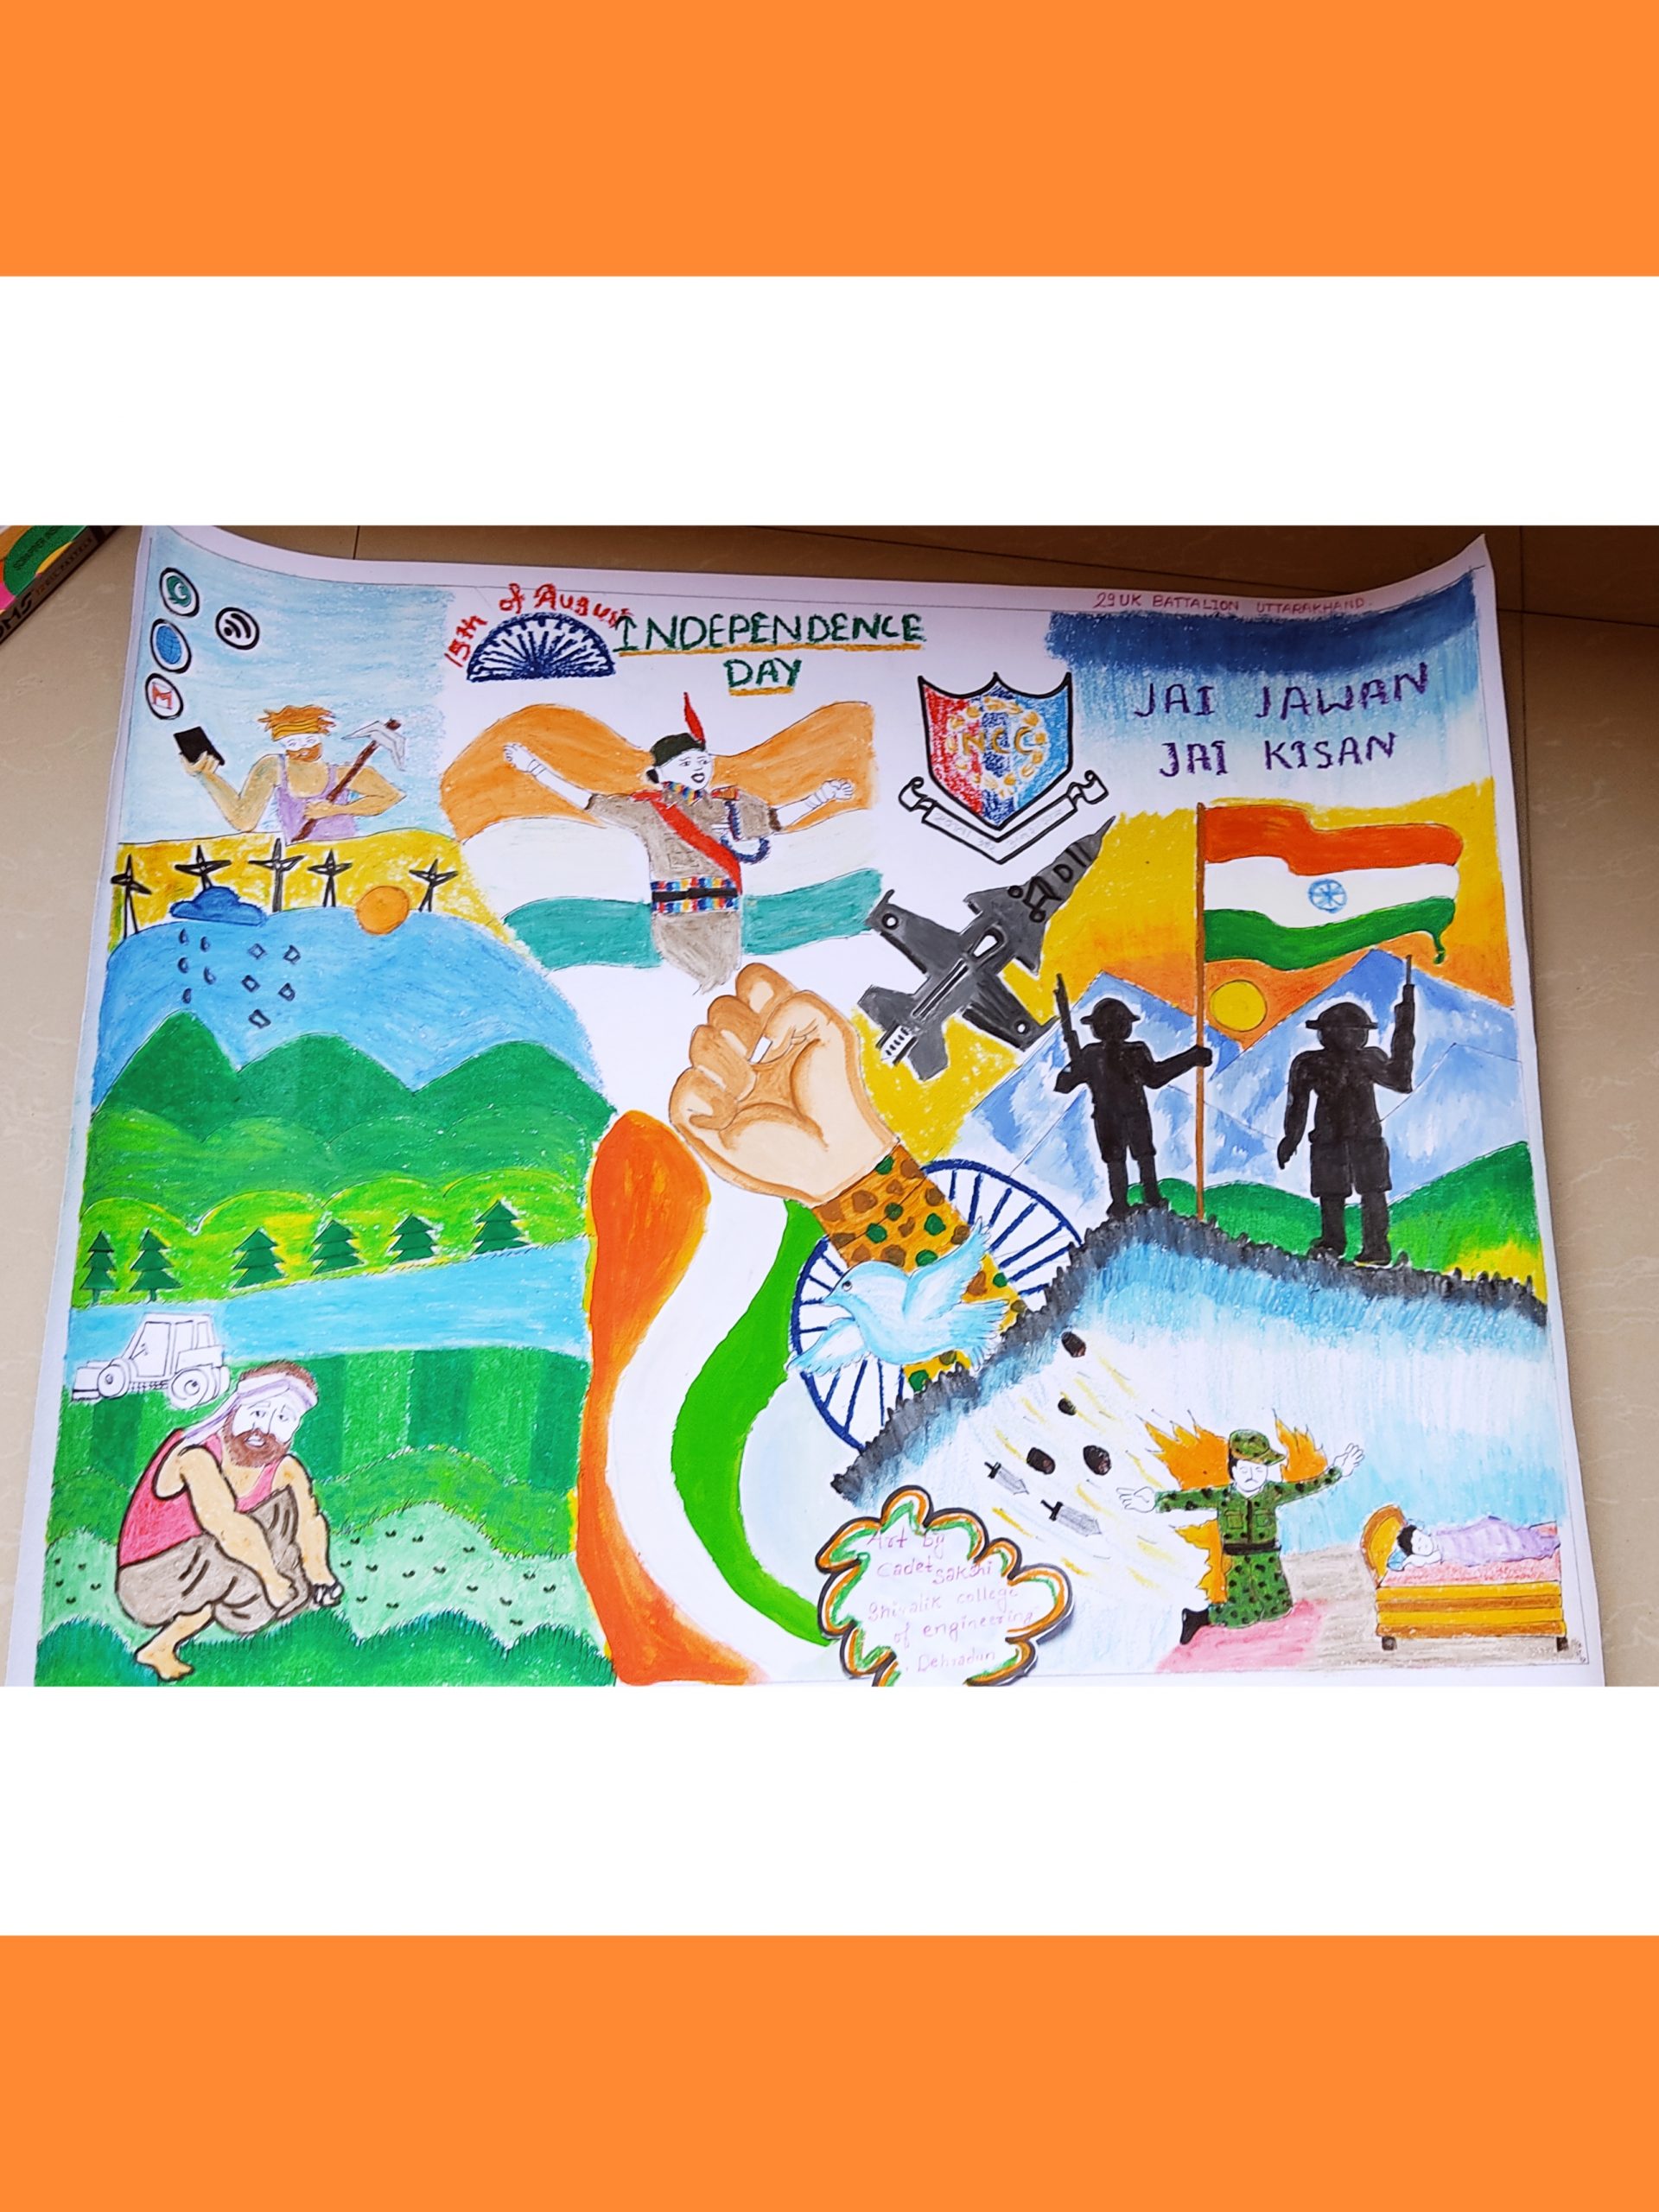 Republic day drawing competition for kids | independence day poster drawing  | India Flag Drawing - YouTube